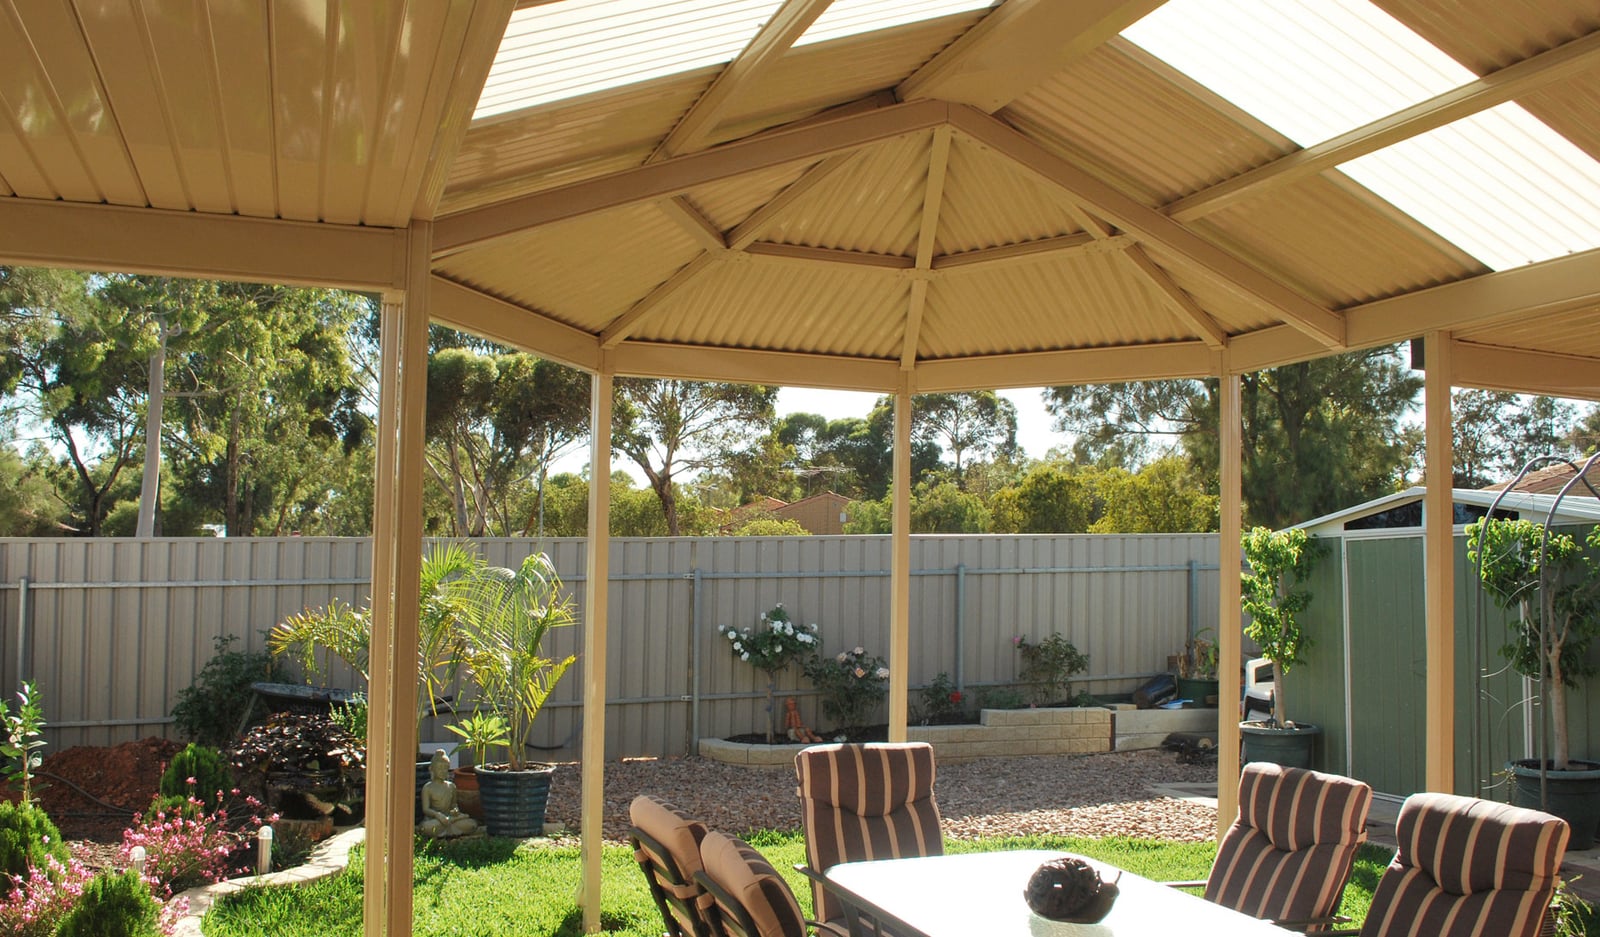 Your Surefire Guide To Building a Steel Gazebo